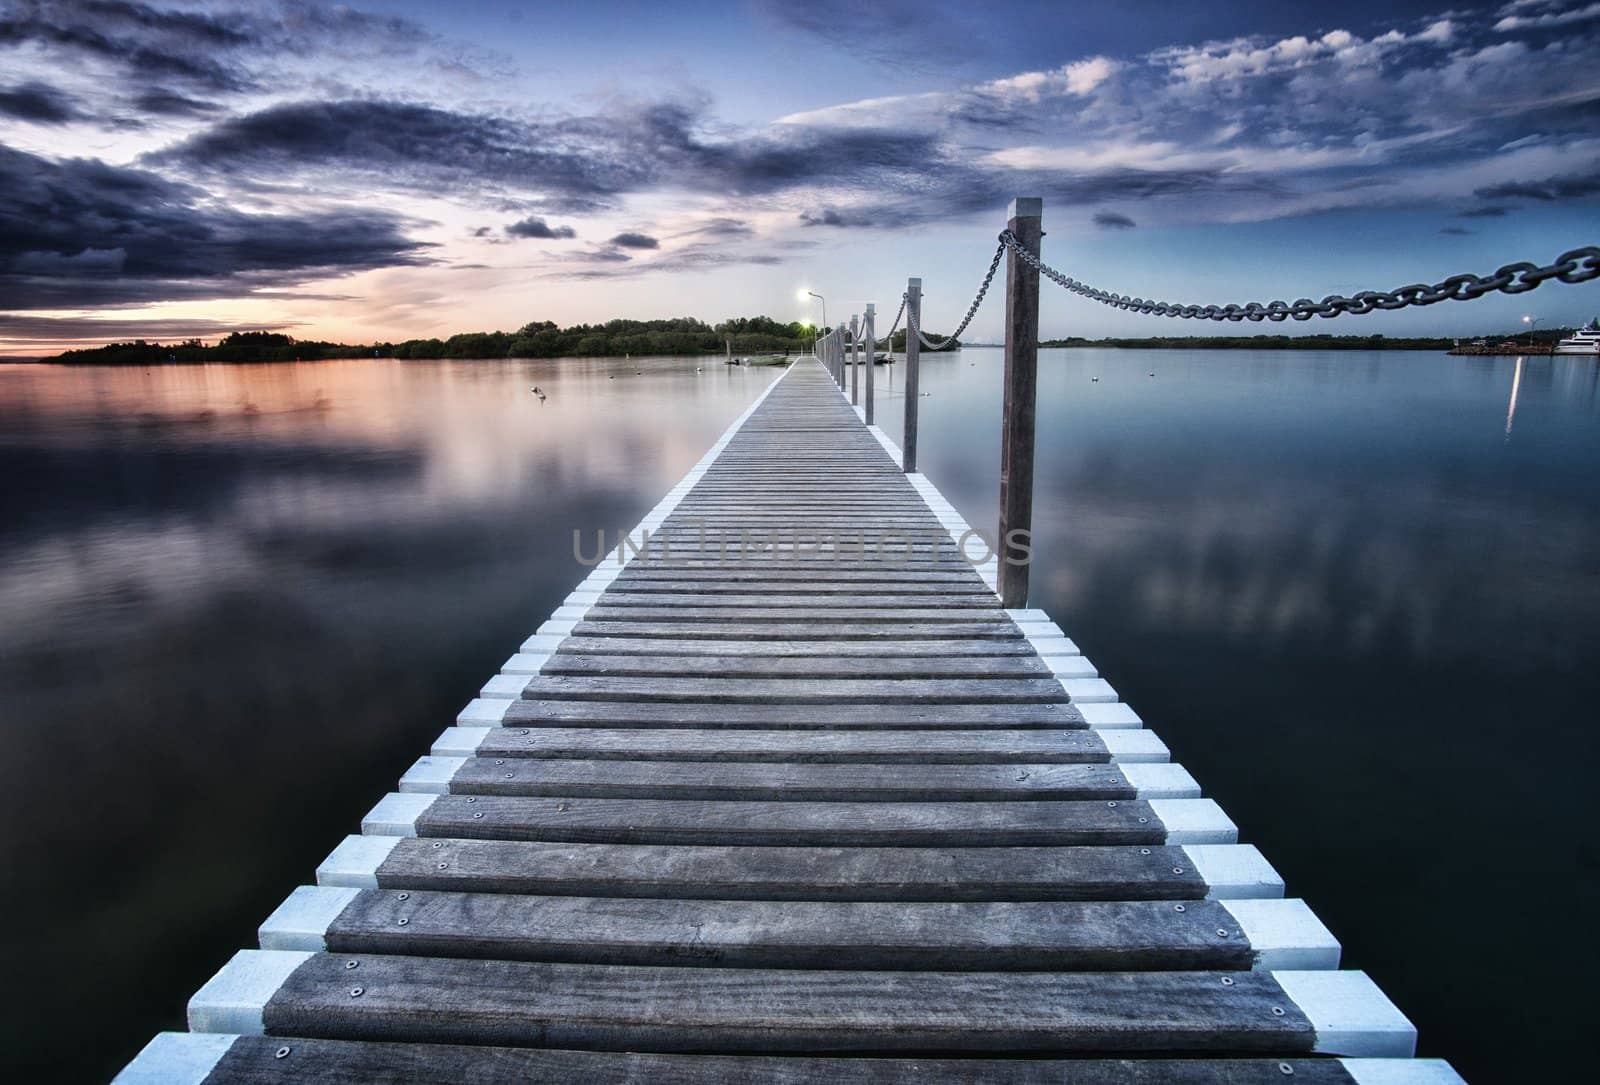 pontoon jetty across the water by clearviewstock